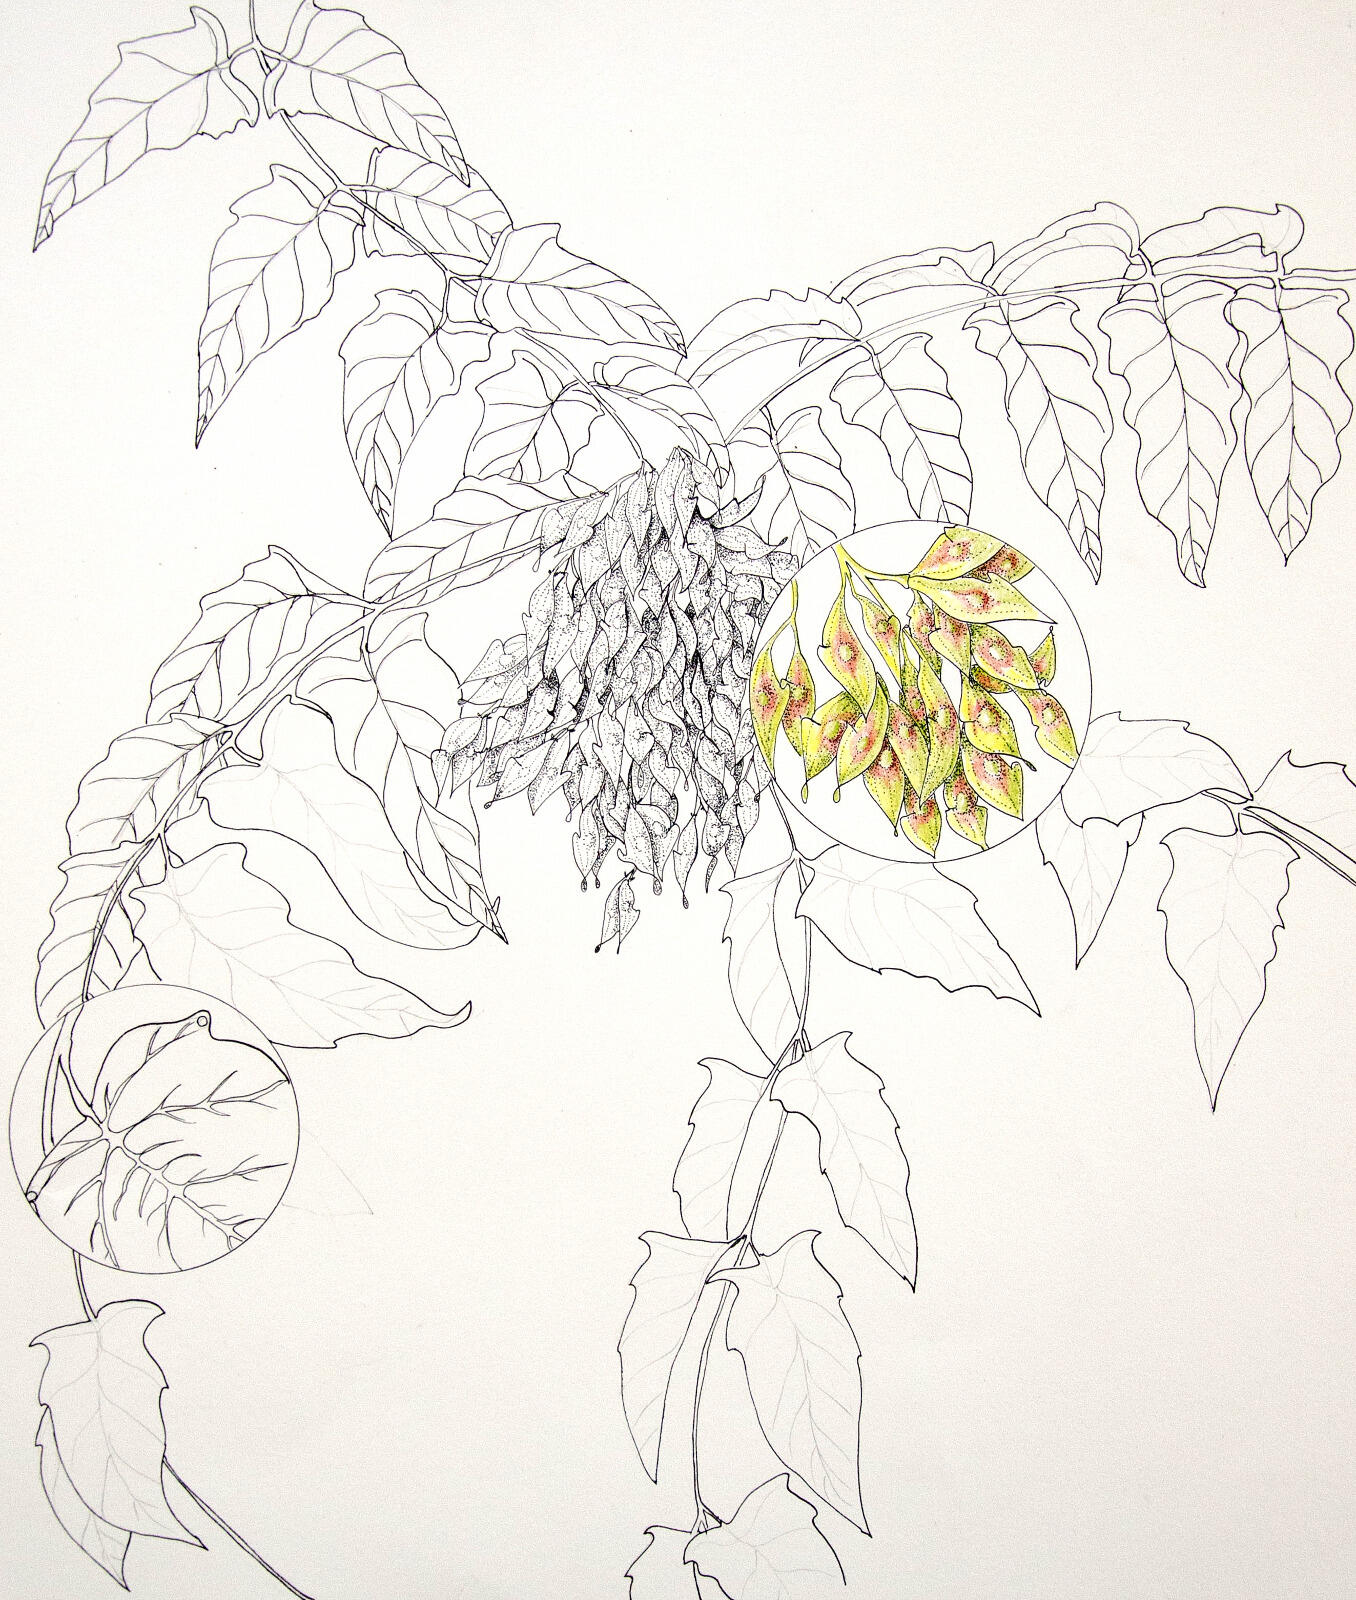 Ailanthus altissima, Or "Tree-of-Heaven," is an invasive plant that can be found in the James River Park System. Drawing by Judy Thomas, Ph.D.